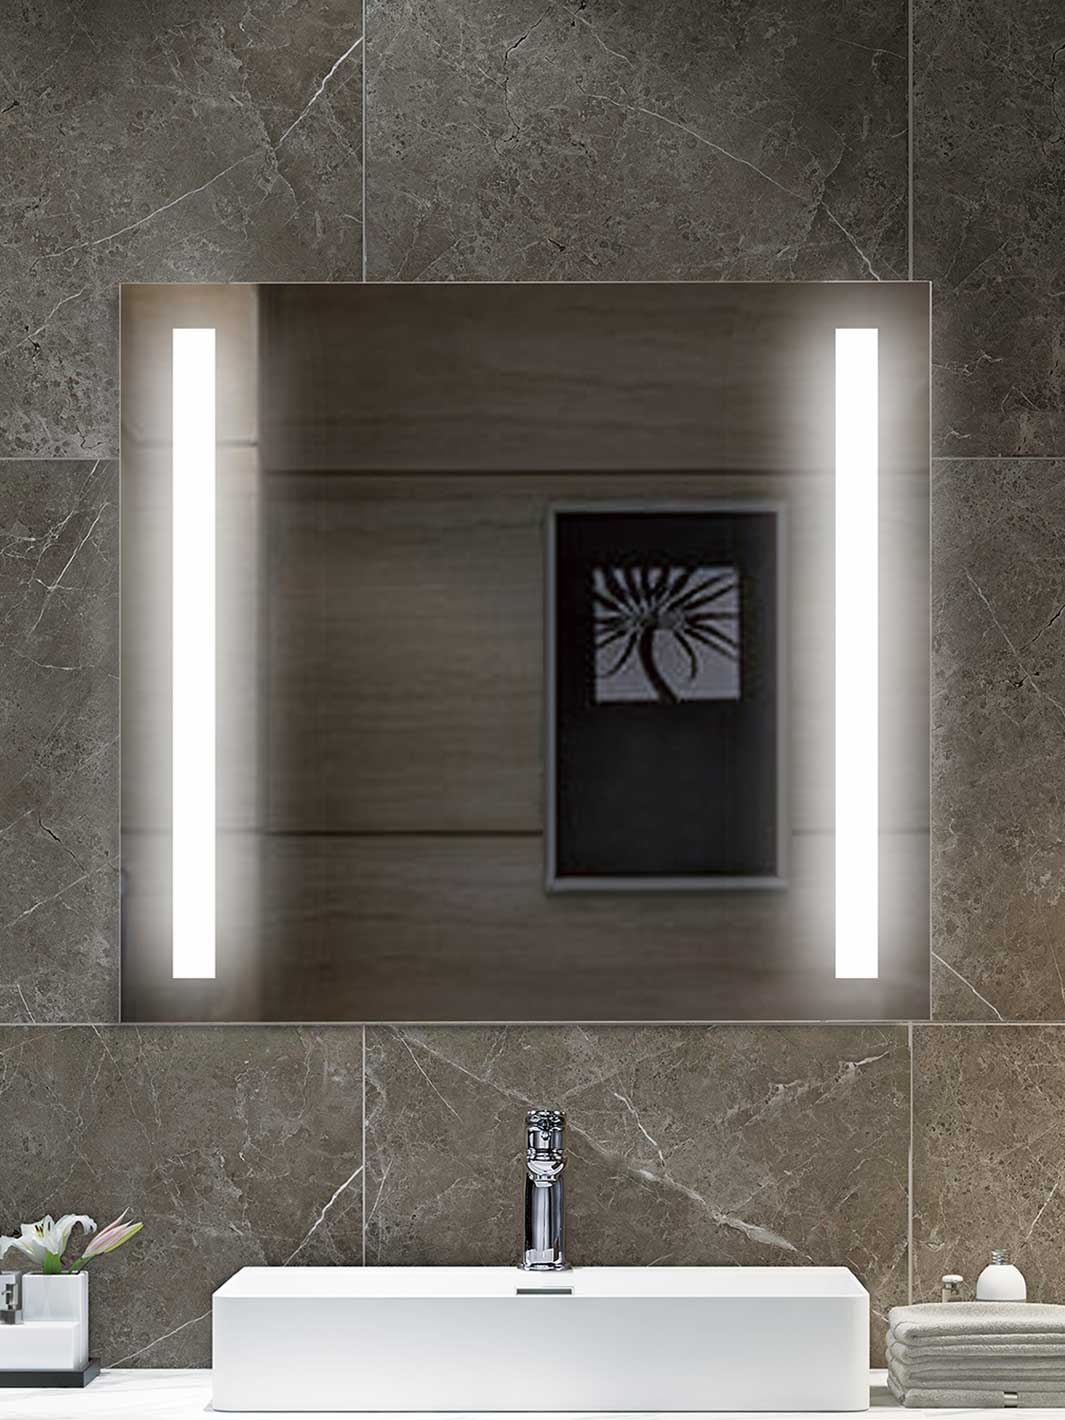 LED backlit bathroom mirror with two light strips